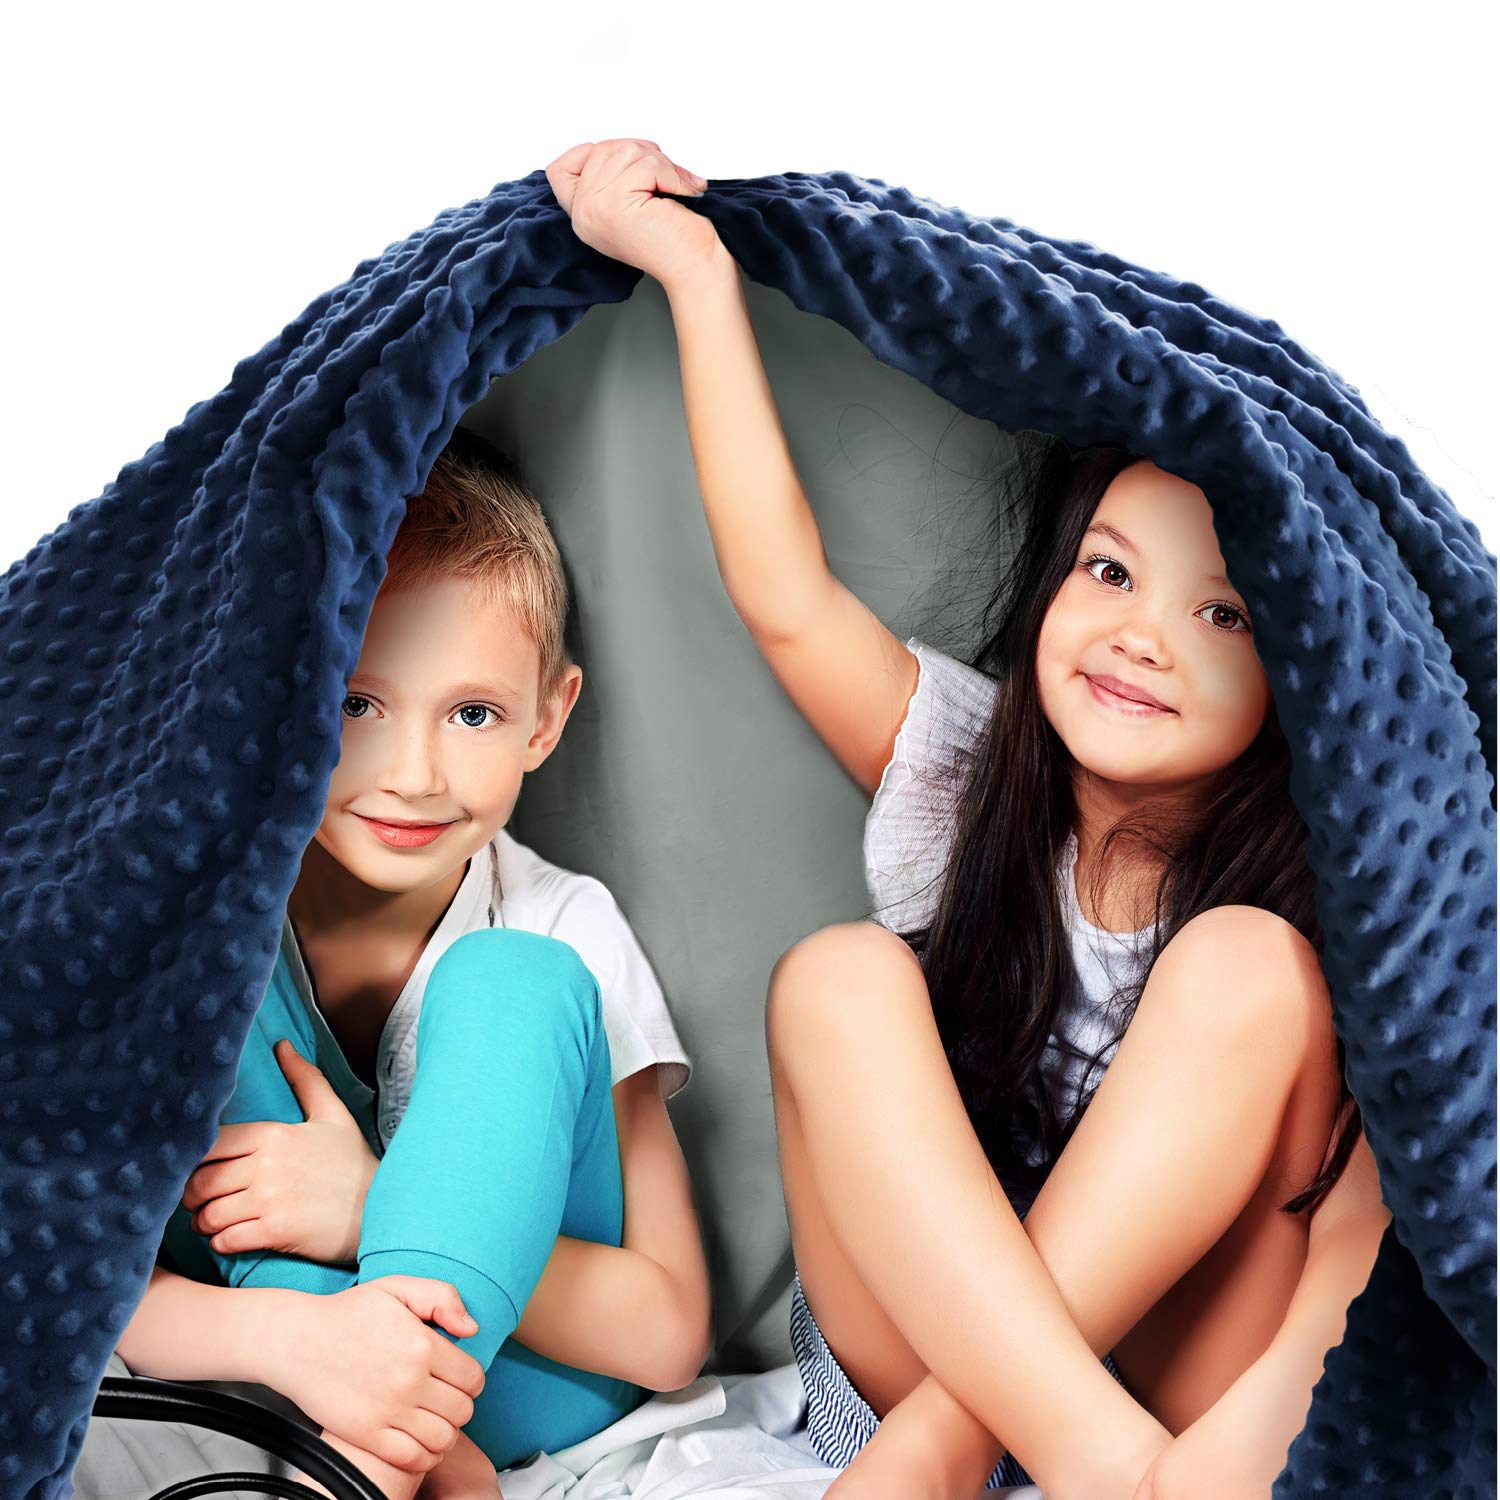 Dreamy Design | Grey Weighted Comforter with Removable Navy Blue Soft Minky Cover Perfect for 42-63lb Children Size 36x48 Homshley Valleys Boys & Girls Weighted Blanket for Kids 5lbs